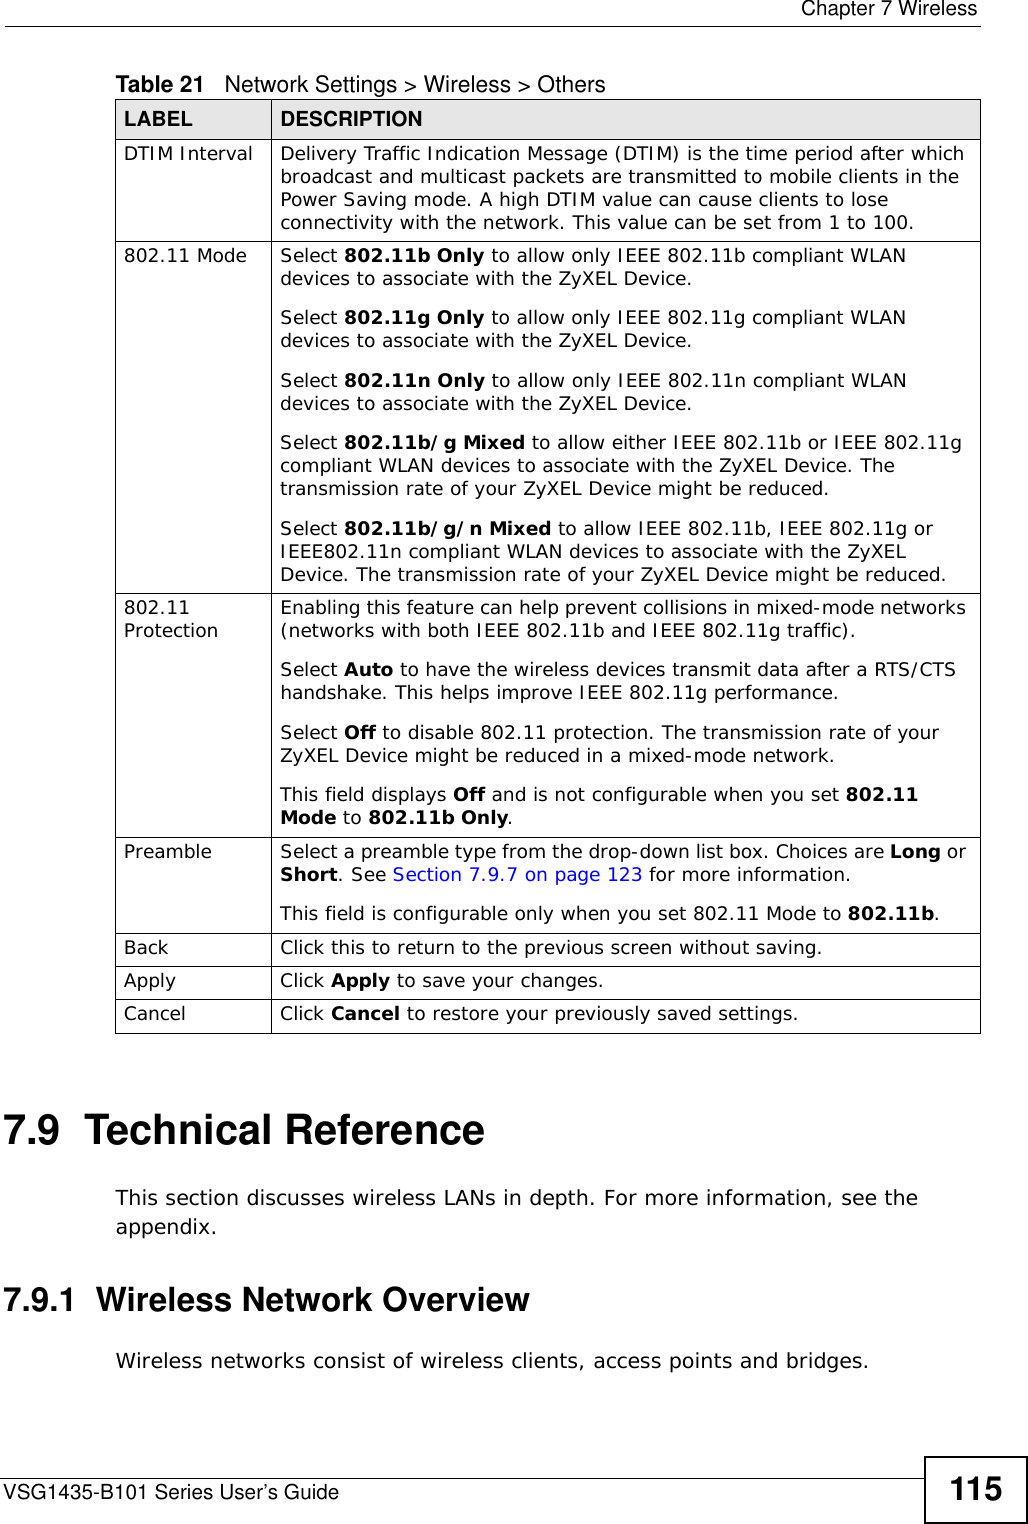  Chapter 7 WirelessVSG1435-B101 Series User’s Guide 1157.9  Technical ReferenceThis section discusses wireless LANs in depth. For more information, see the appendix.7.9.1  Wireless Network OverviewWireless networks consist of wireless clients, access points and bridges. DTIM Interval Delivery Traffic Indication Message (DTIM) is the time period after which broadcast and multicast packets are transmitted to mobile clients in the Power Saving mode. A high DTIM value can cause clients to lose connectivity with the network. This value can be set from 1 to 100.802.11 Mode Select 802.11b Only to allow only IEEE 802.11b compliant WLAN devices to associate with the ZyXEL Device.Select 802.11g Only to allow only IEEE 802.11g compliant WLAN devices to associate with the ZyXEL Device.Select 802.11n Only to allow only IEEE 802.11n compliant WLAN devices to associate with the ZyXEL Device.Select 802.11b/g Mixed to allow either IEEE 802.11b or IEEE 802.11g compliant WLAN devices to associate with the ZyXEL Device. The transmission rate of your ZyXEL Device might be reduced.Select 802.11b/g/n Mixed to allow IEEE 802.11b, IEEE 802.11g or IEEE802.11n compliant WLAN devices to associate with the ZyXEL Device. The transmission rate of your ZyXEL Device might be reduced.802.11 Protection Enabling this feature can help prevent collisions in mixed-mode networks (networks with both IEEE 802.11b and IEEE 802.11g traffic).Select Auto to have the wireless devices transmit data after a RTS/CTS handshake. This helps improve IEEE 802.11g performance.Select Off to disable 802.11 protection. The transmission rate of your ZyXEL Device might be reduced in a mixed-mode network.This field displays Off and is not configurable when you set 802.11 Mode to 802.11b Only.Preamble Select a preamble type from the drop-down list box. Choices are Long or Short. See Section 7.9.7 on page 123 for more information.This field is configurable only when you set 802.11 Mode to 802.11b.Back Click this to return to the previous screen without saving.Apply Click Apply to save your changes.Cancel Click Cancel to restore your previously saved settings.Table 21   Network Settings &gt; Wireless &gt; OthersLABEL DESCRIPTION